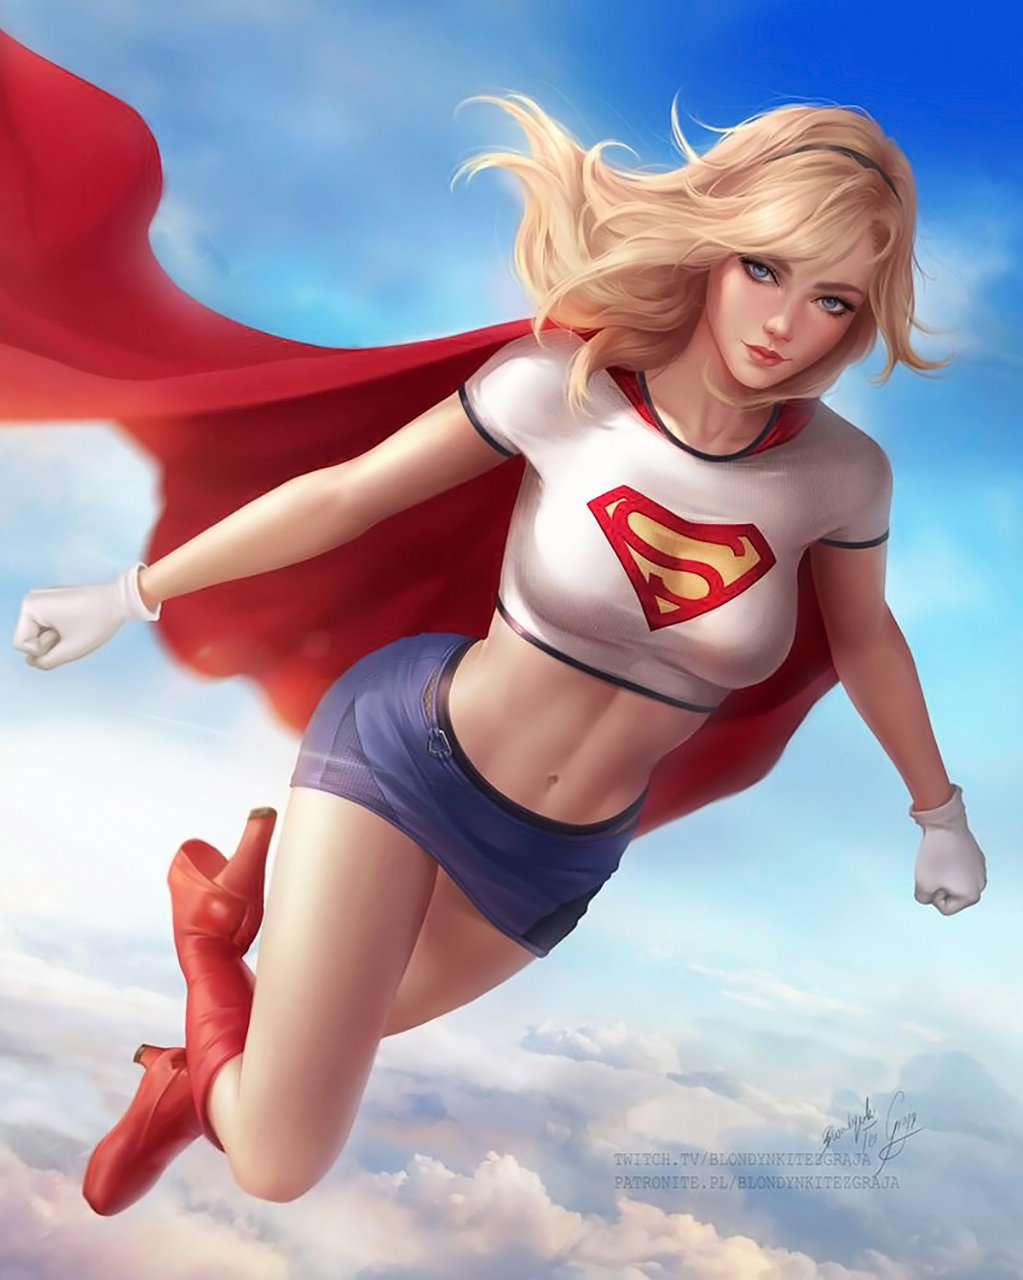 General 1023x1280 Blondynki Tez Graja drawing DC Comics women Supergirl flying blonde cape high heels gloves sky blue eyes clouds abs red boots blue skirt white gloves